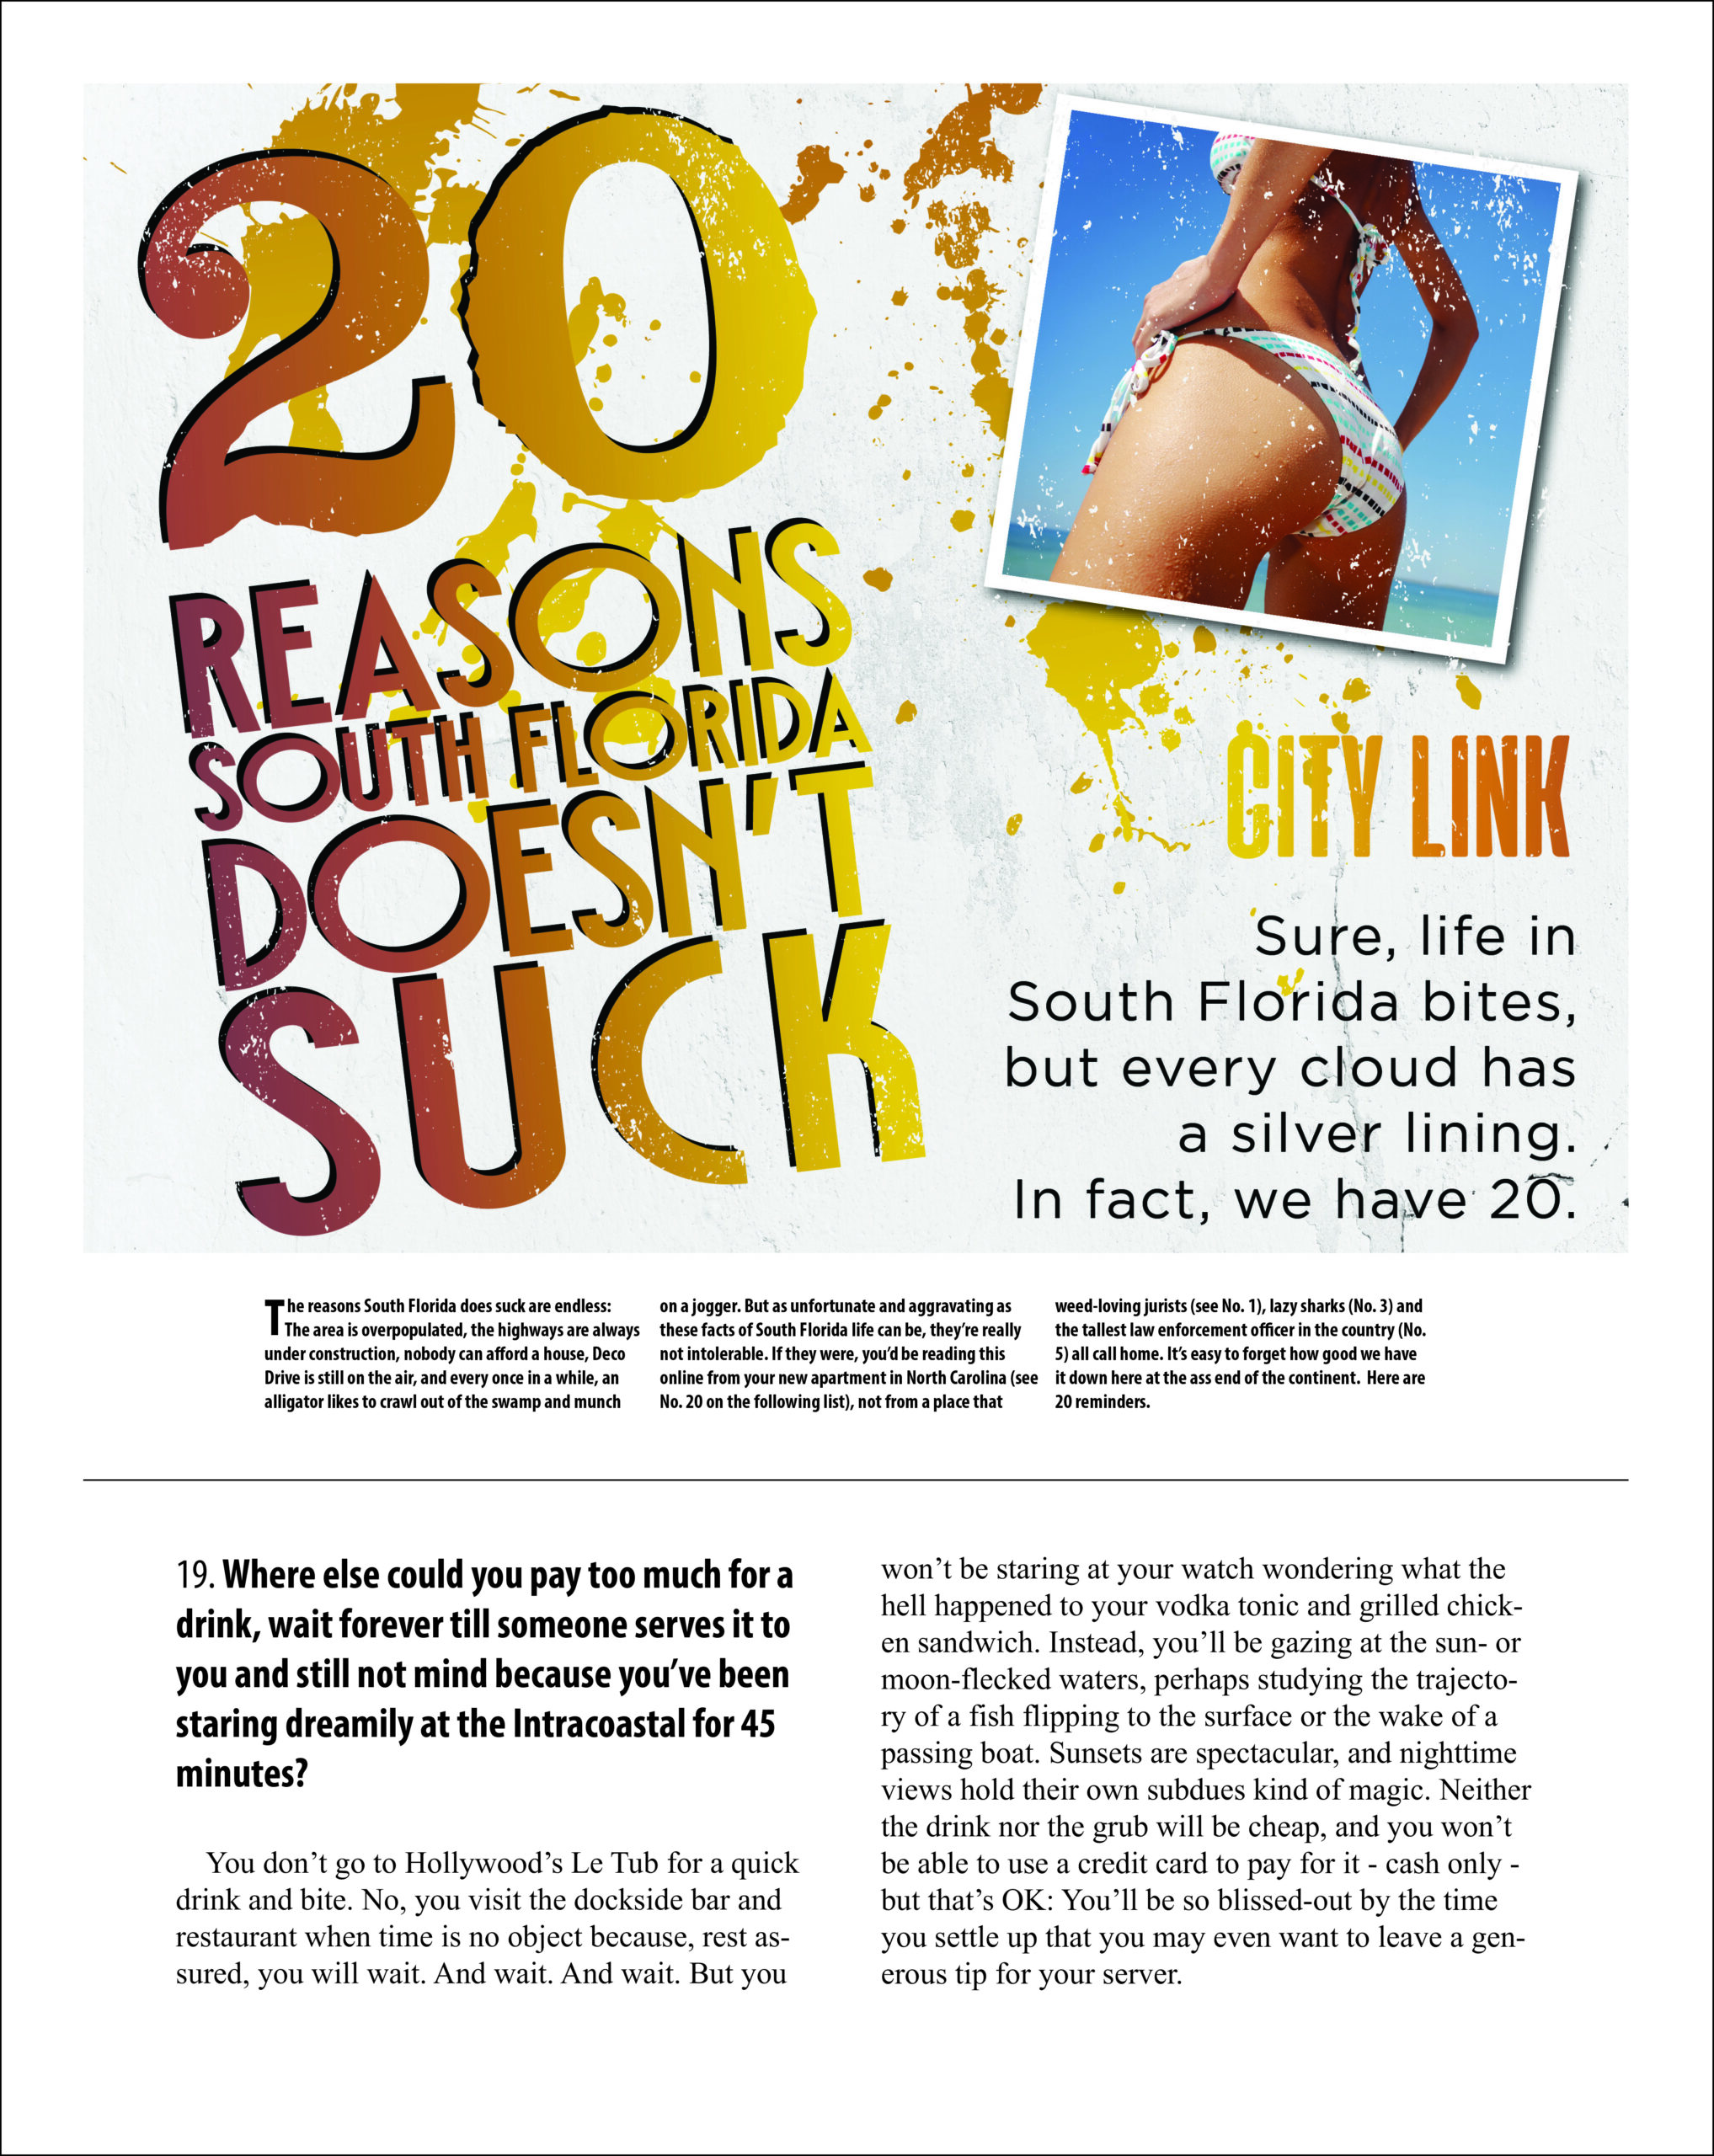 City Link Article 20 Reasons South Florida Doesn’t Suck